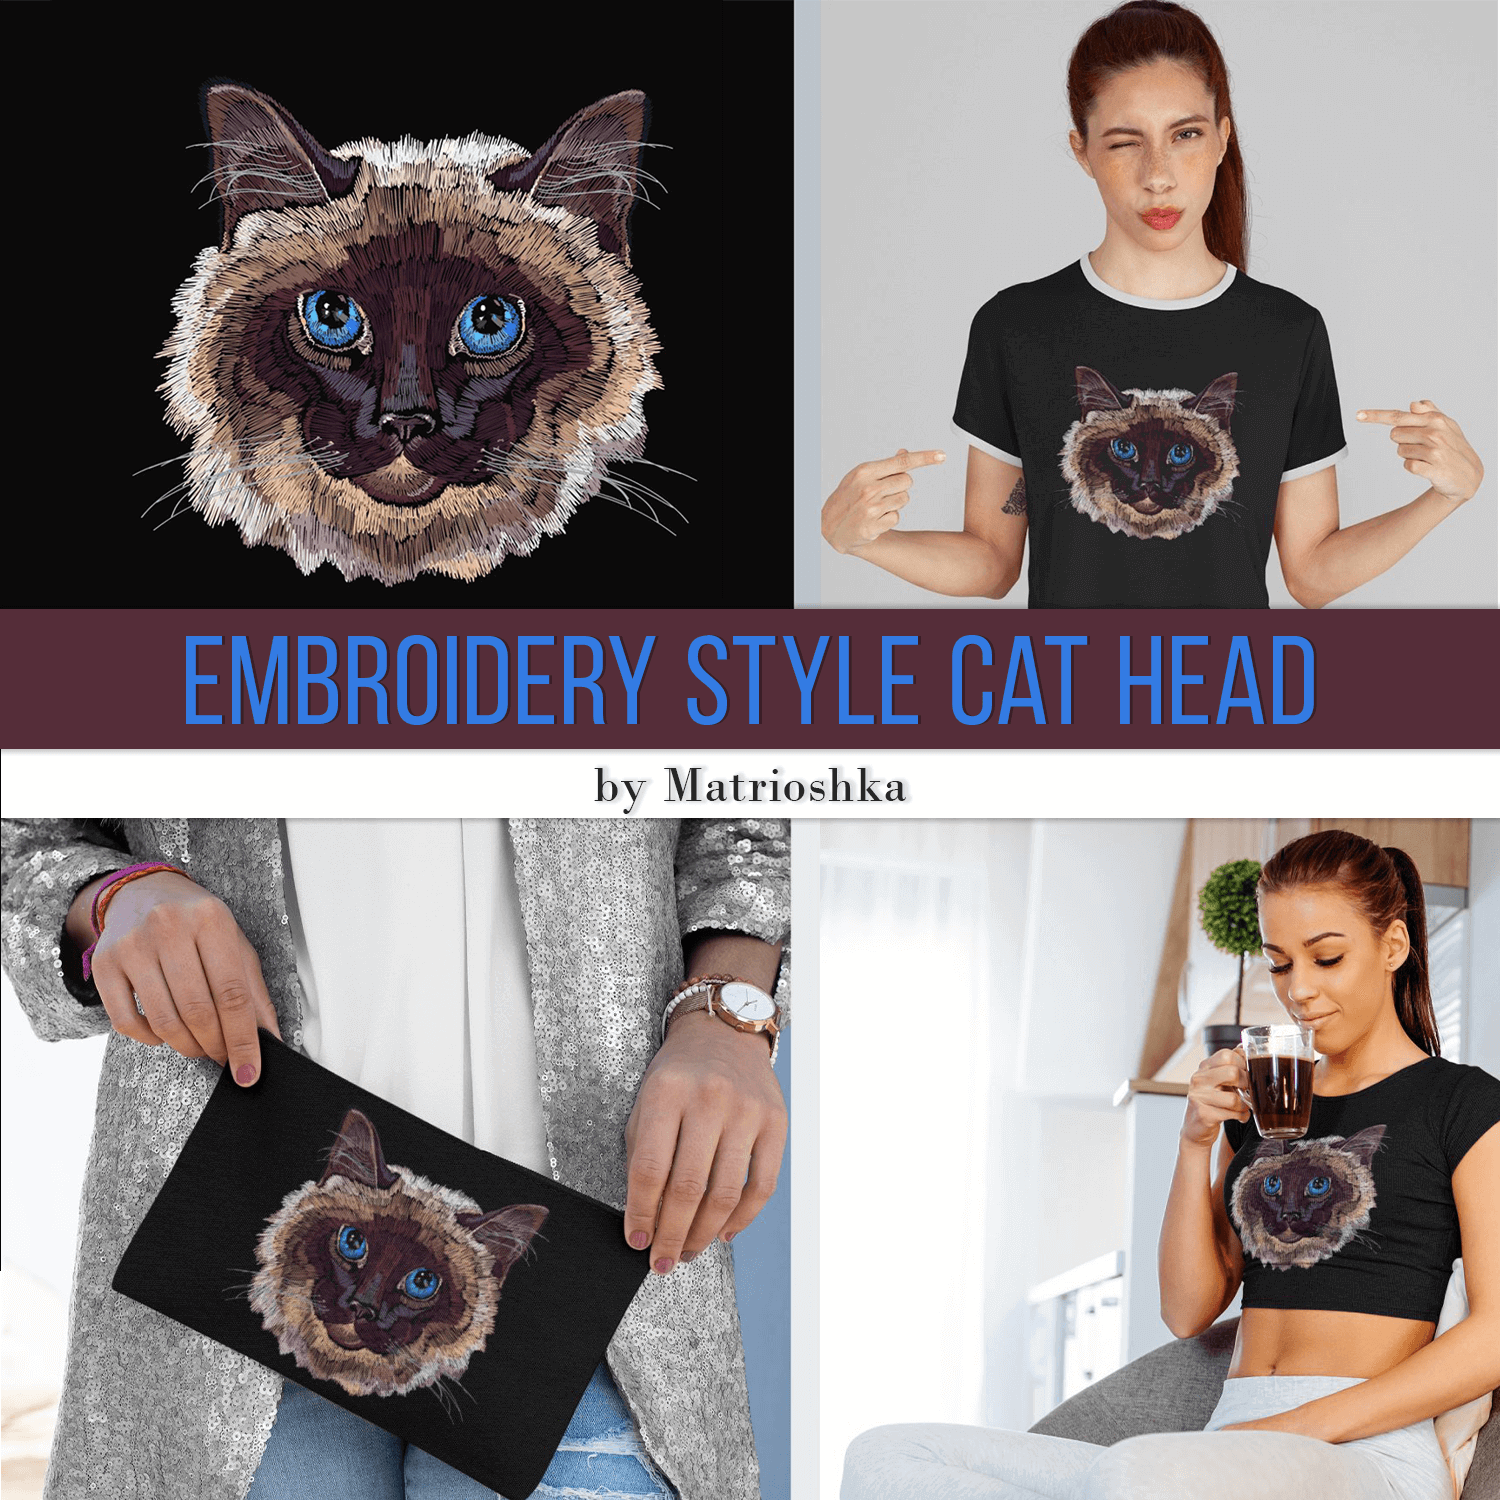 Four examples of using embroidery style cat head.